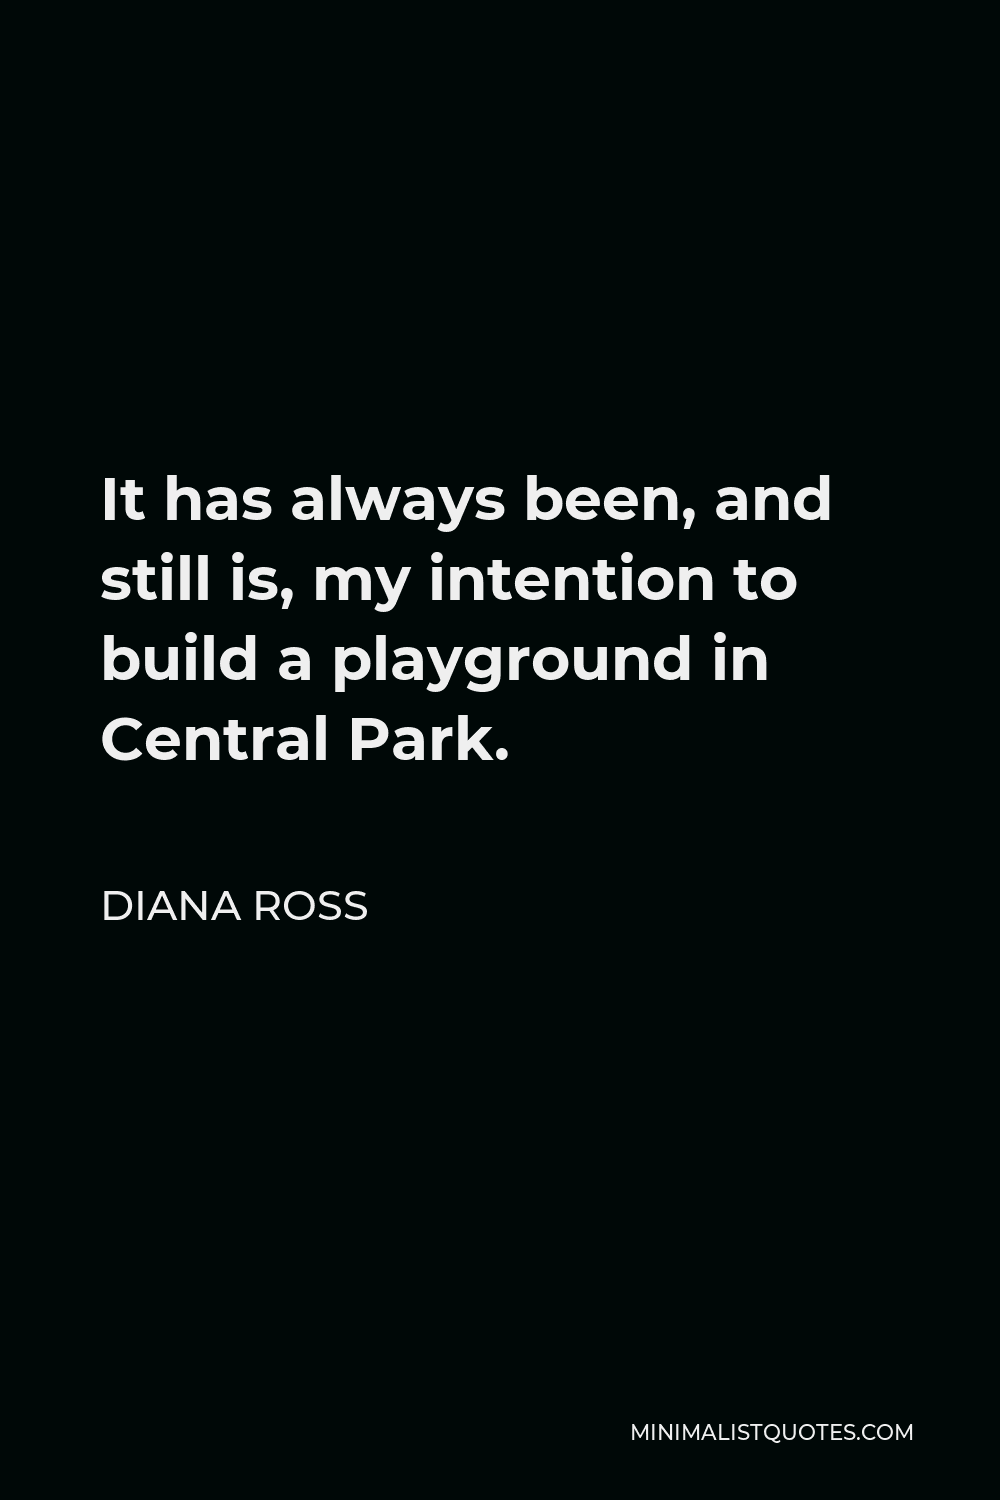 Diana Ross Quote - It has always been, and still is, my intention to build a playground in Central Park.